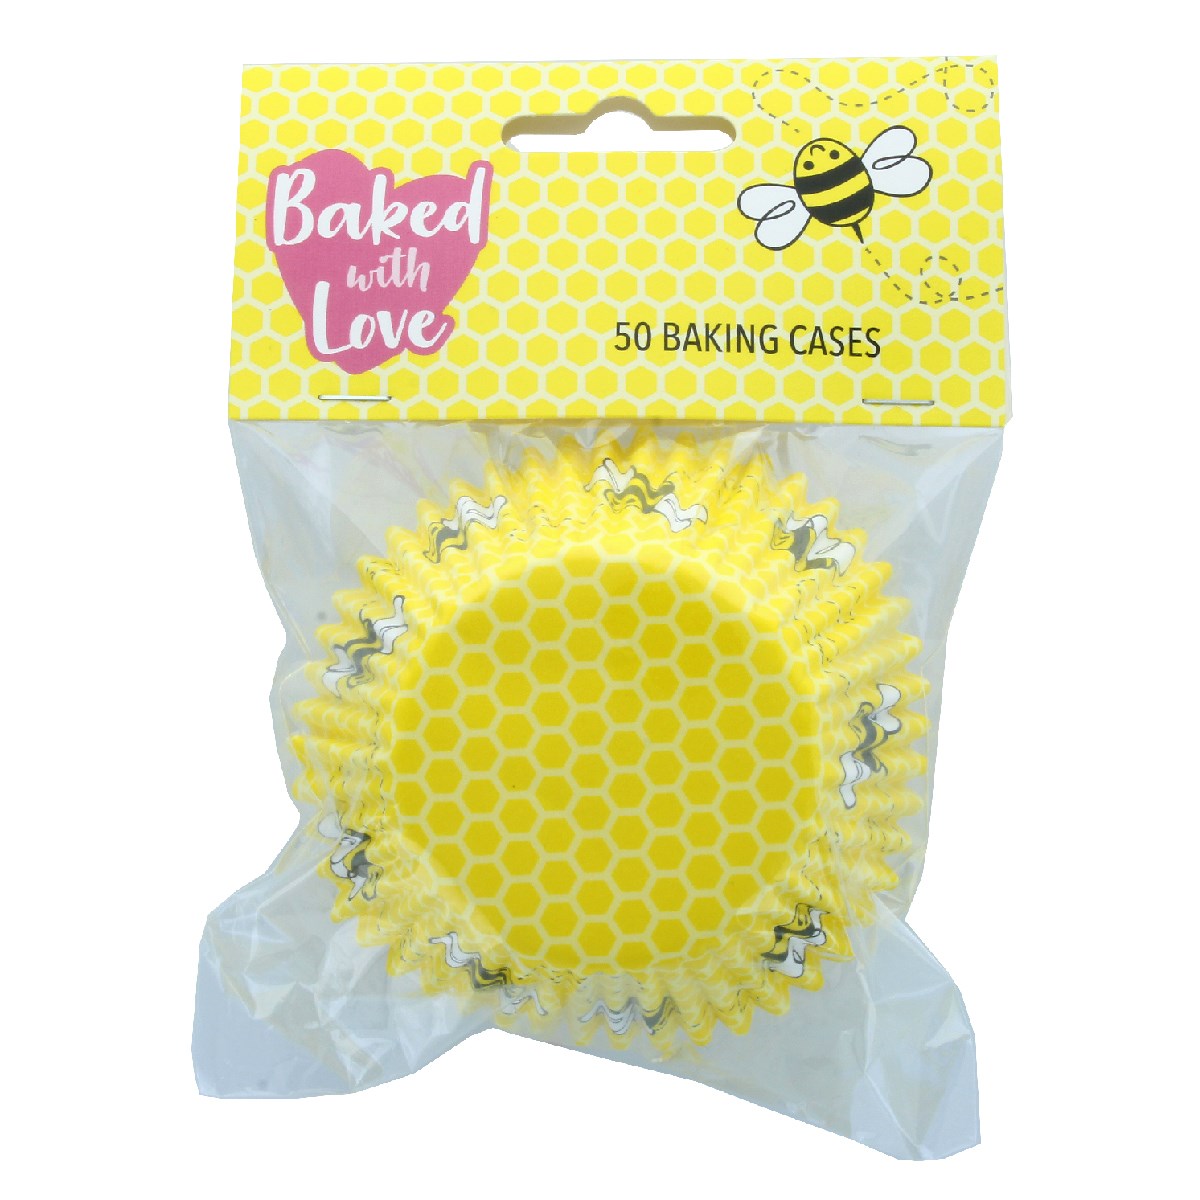 Honeycomb & Bee Pattern Cupcake Baking Cases Pack of 50 